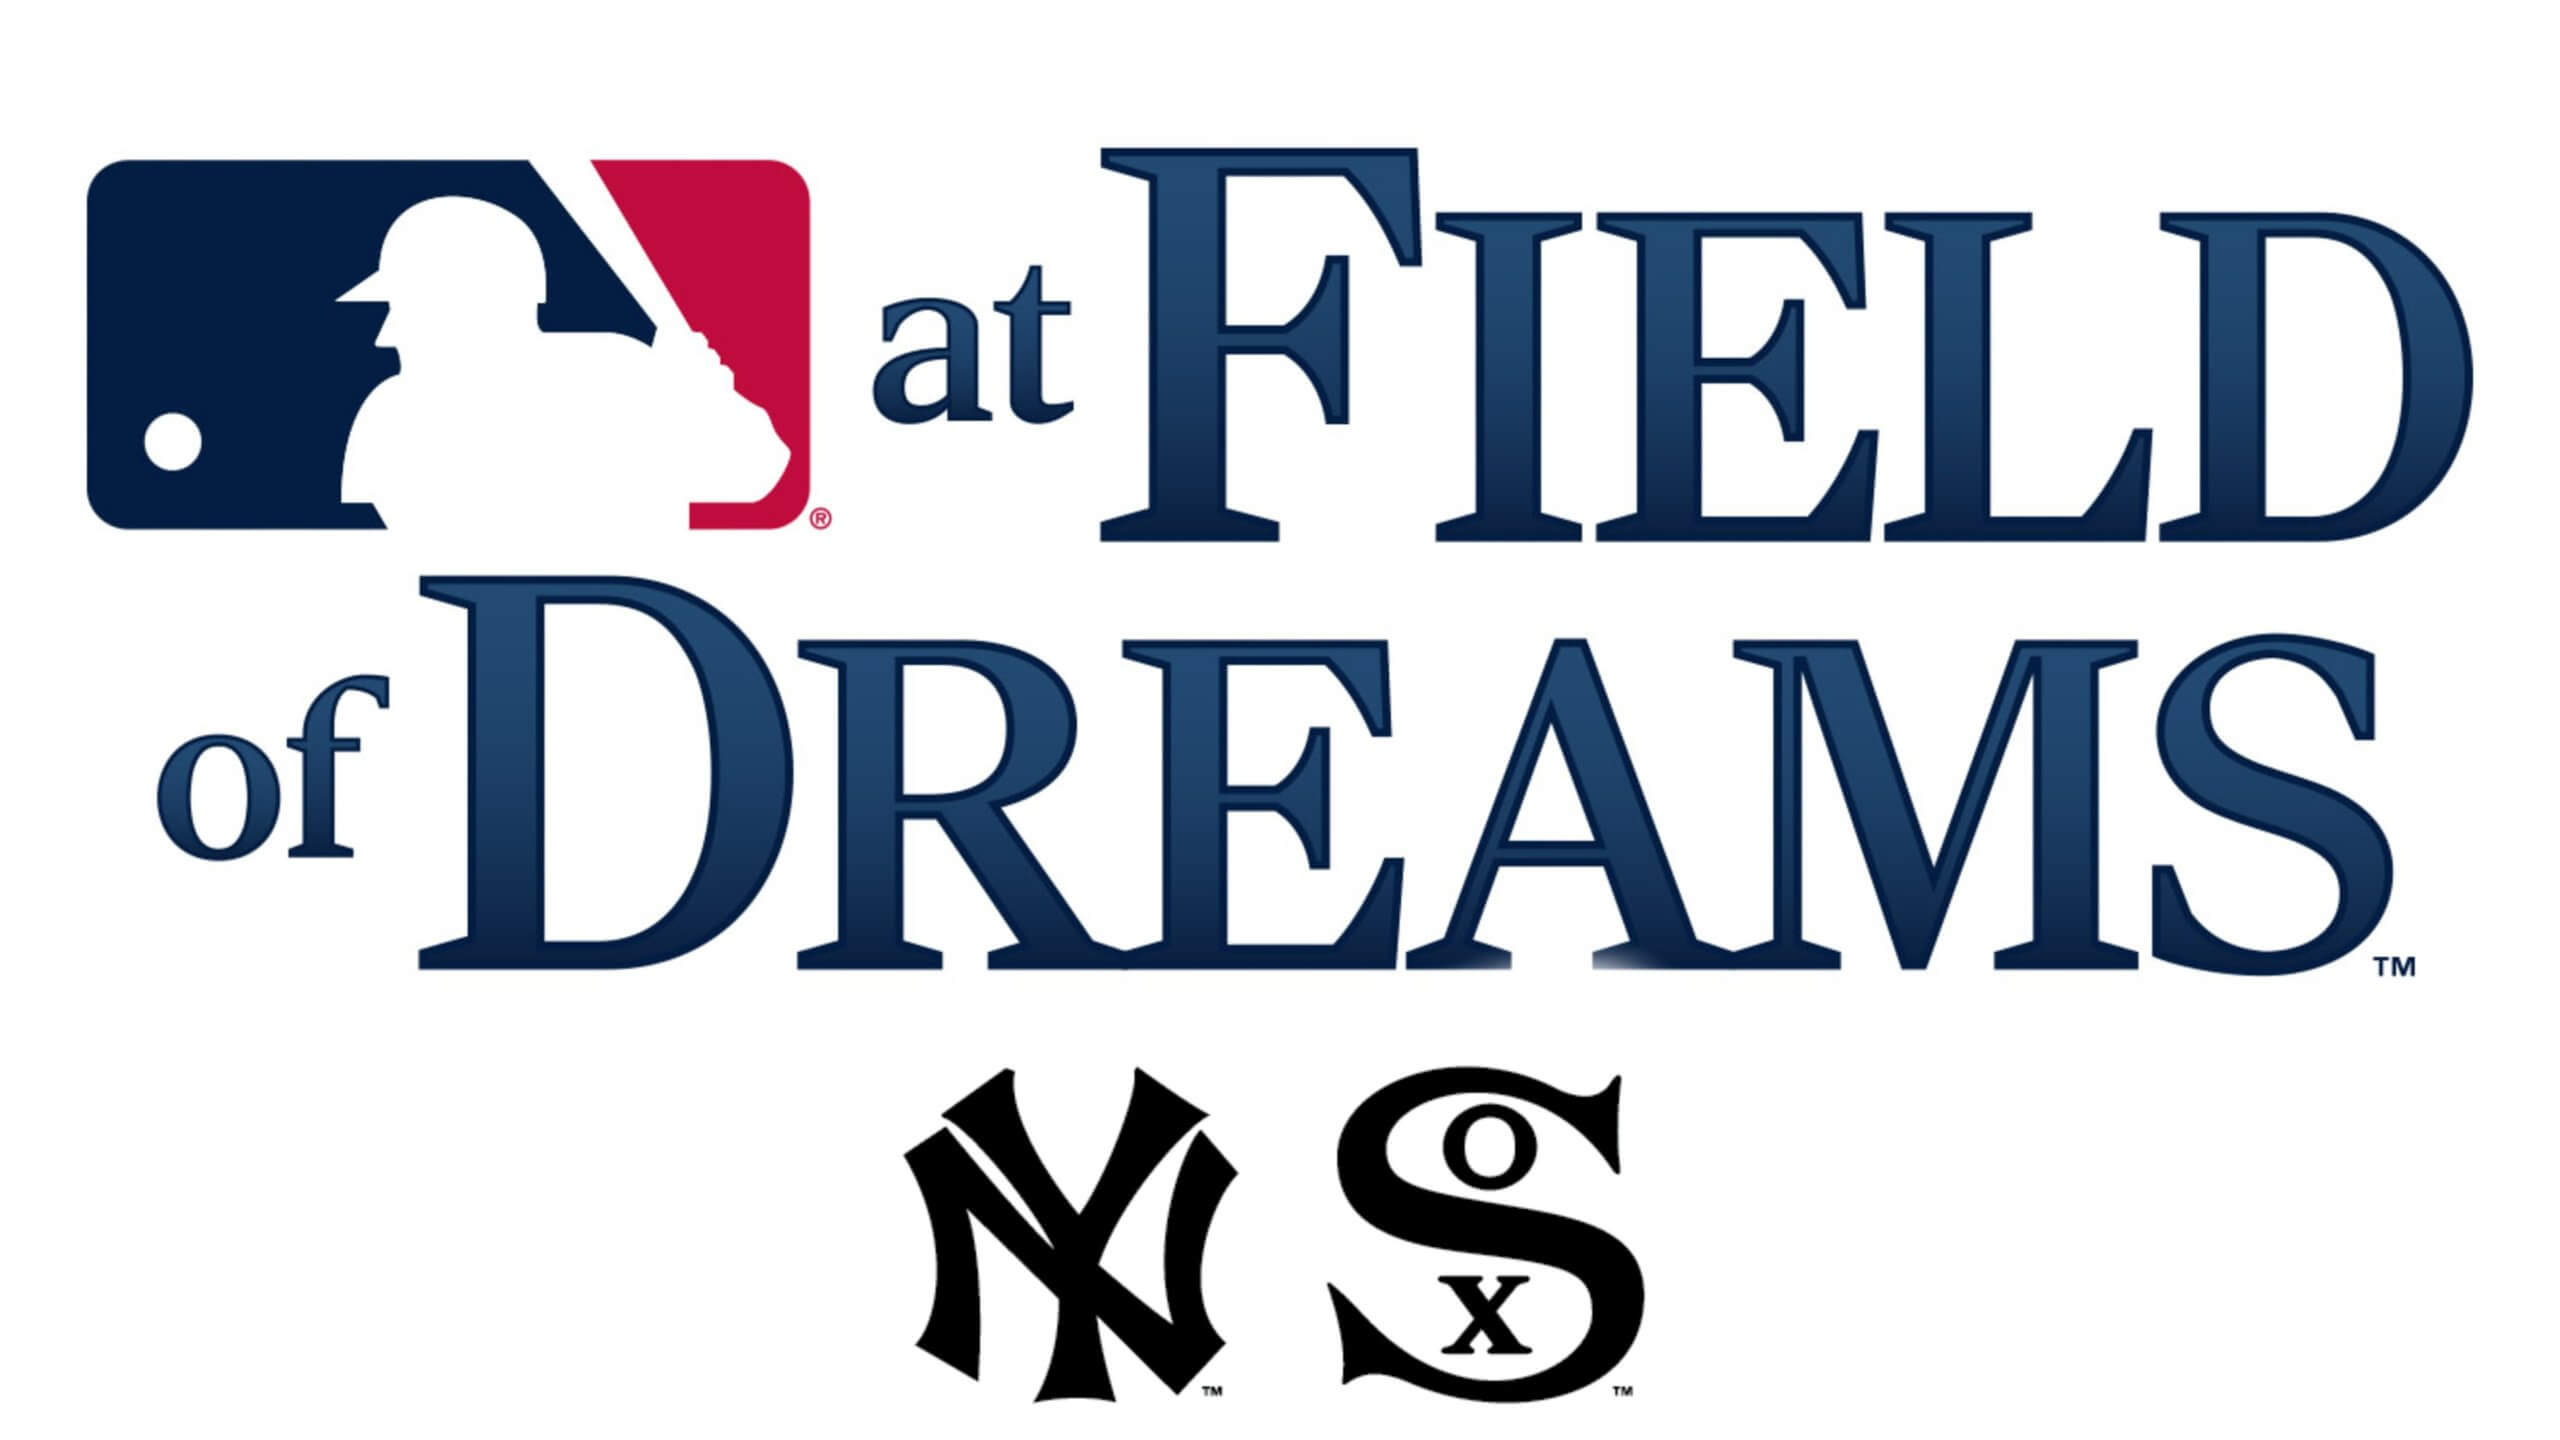 Photos of MLB's Field of Dreams stadium before Yankees-White Sox game